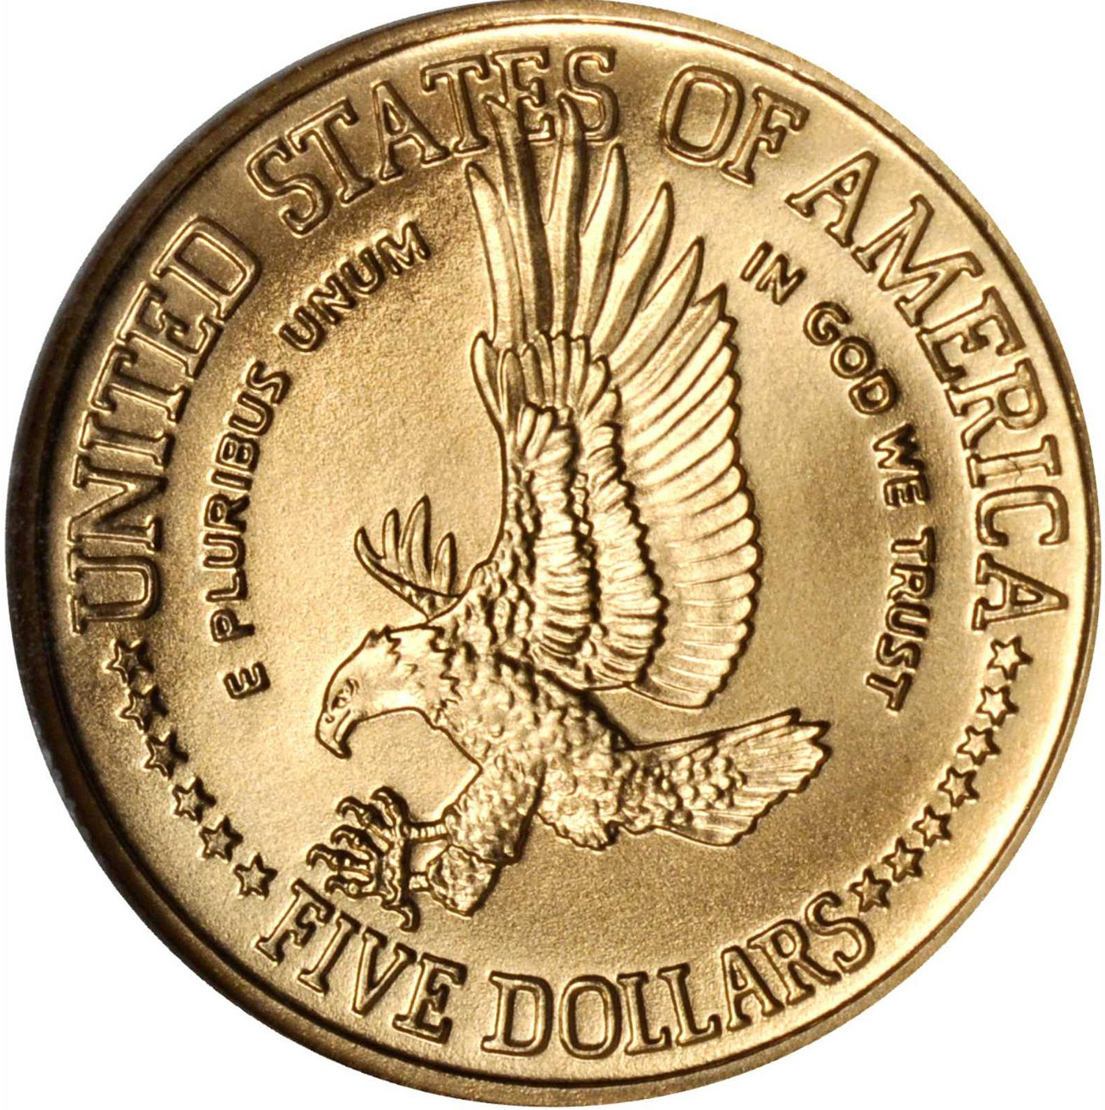 value-of-1986-5-statue-of-liberty-coin-sell-gold-coins